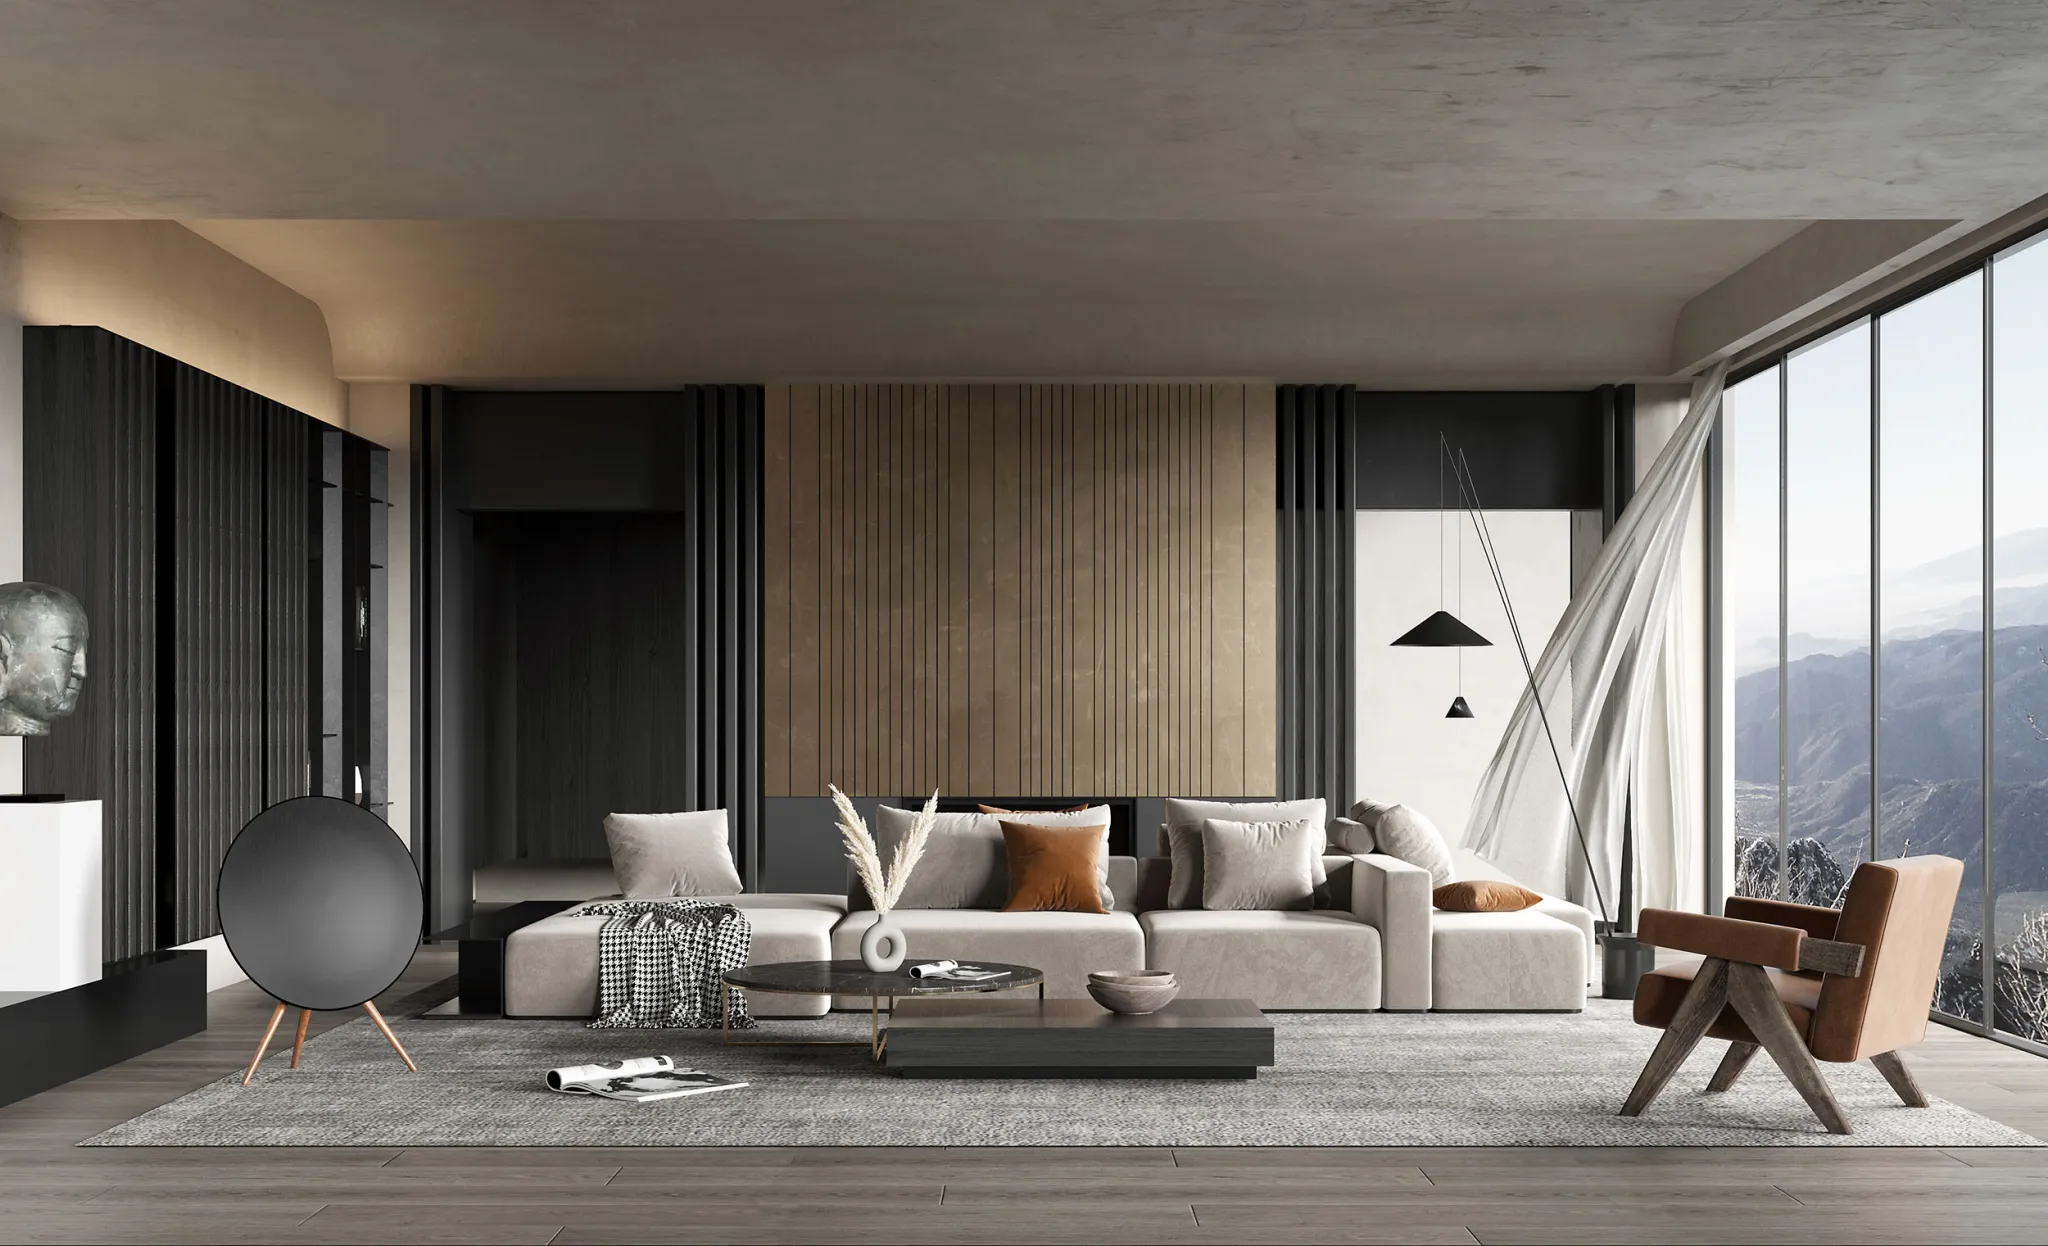 HOUSE SPACE 3D SCENES – LIVING ROOM – 0105